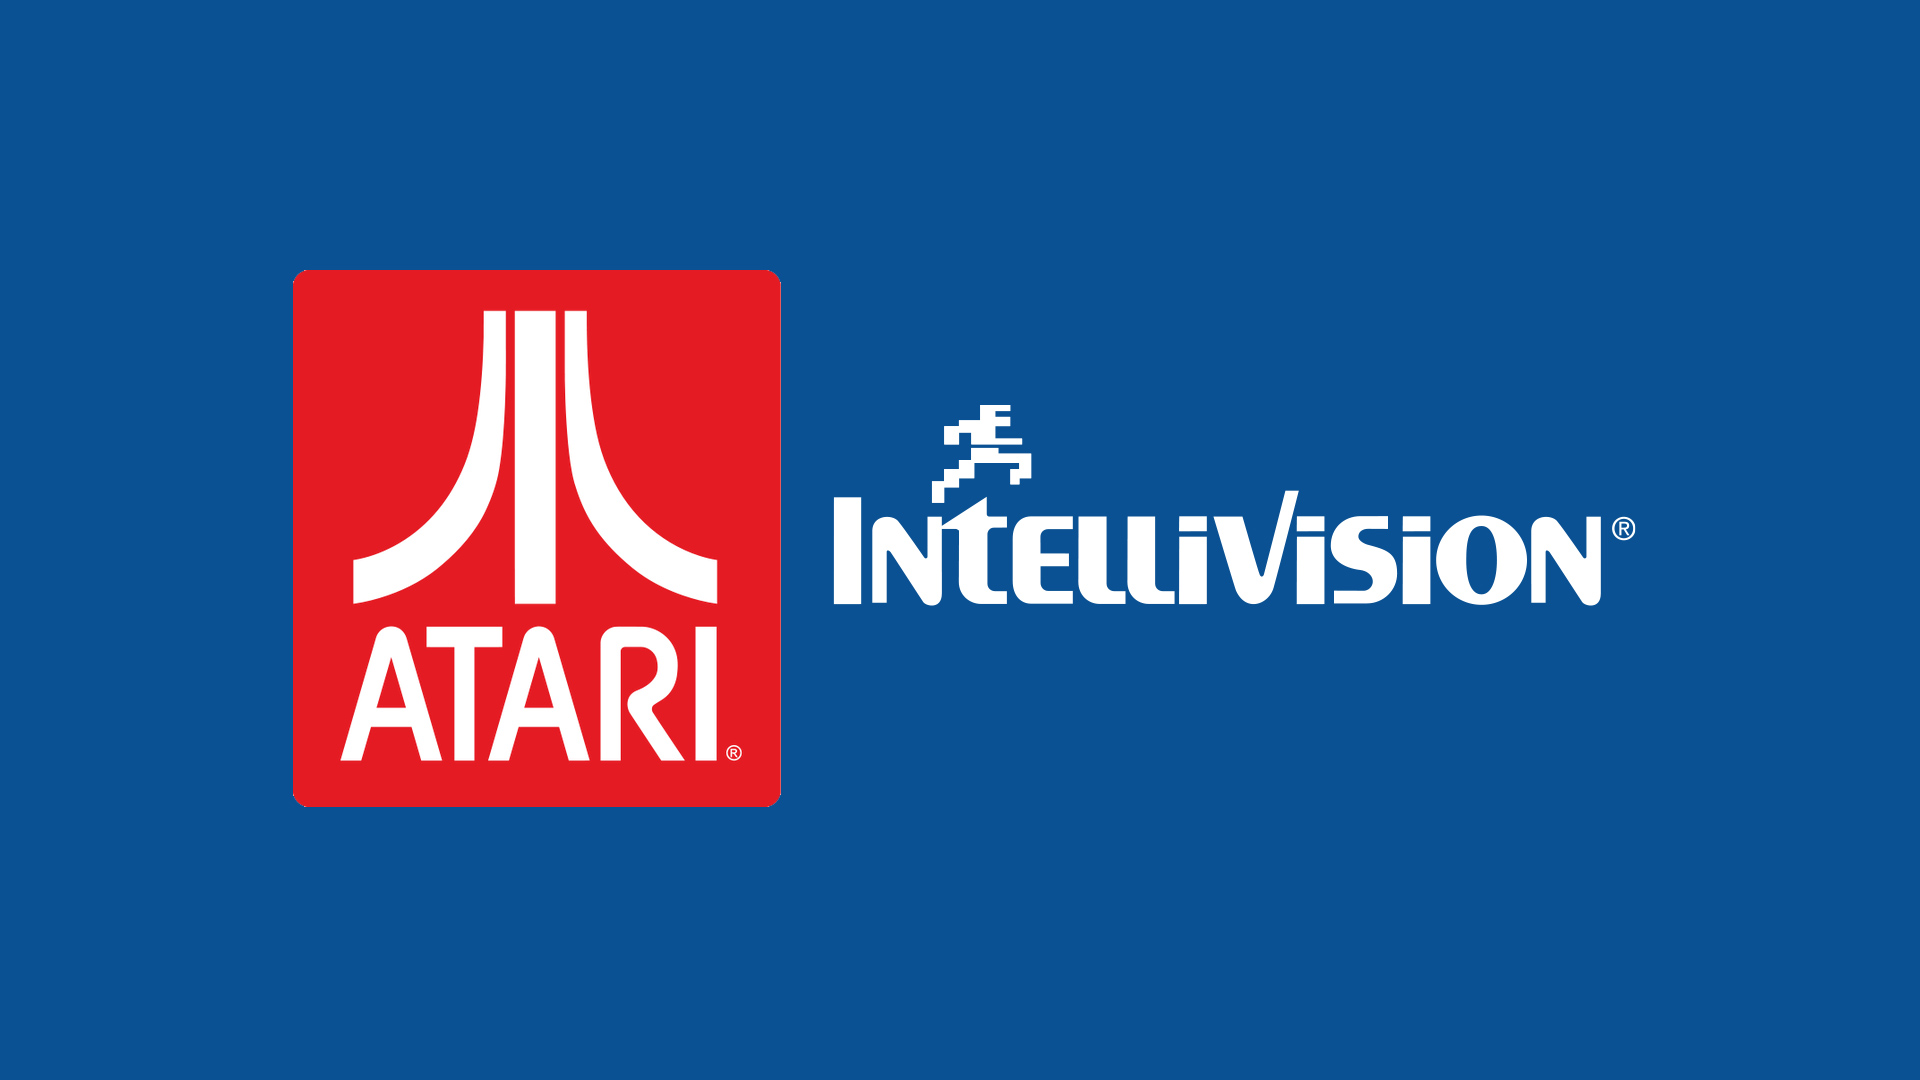 Atari has purchased the Intellvision brand and certain games from Intellivision Entertainment LLC